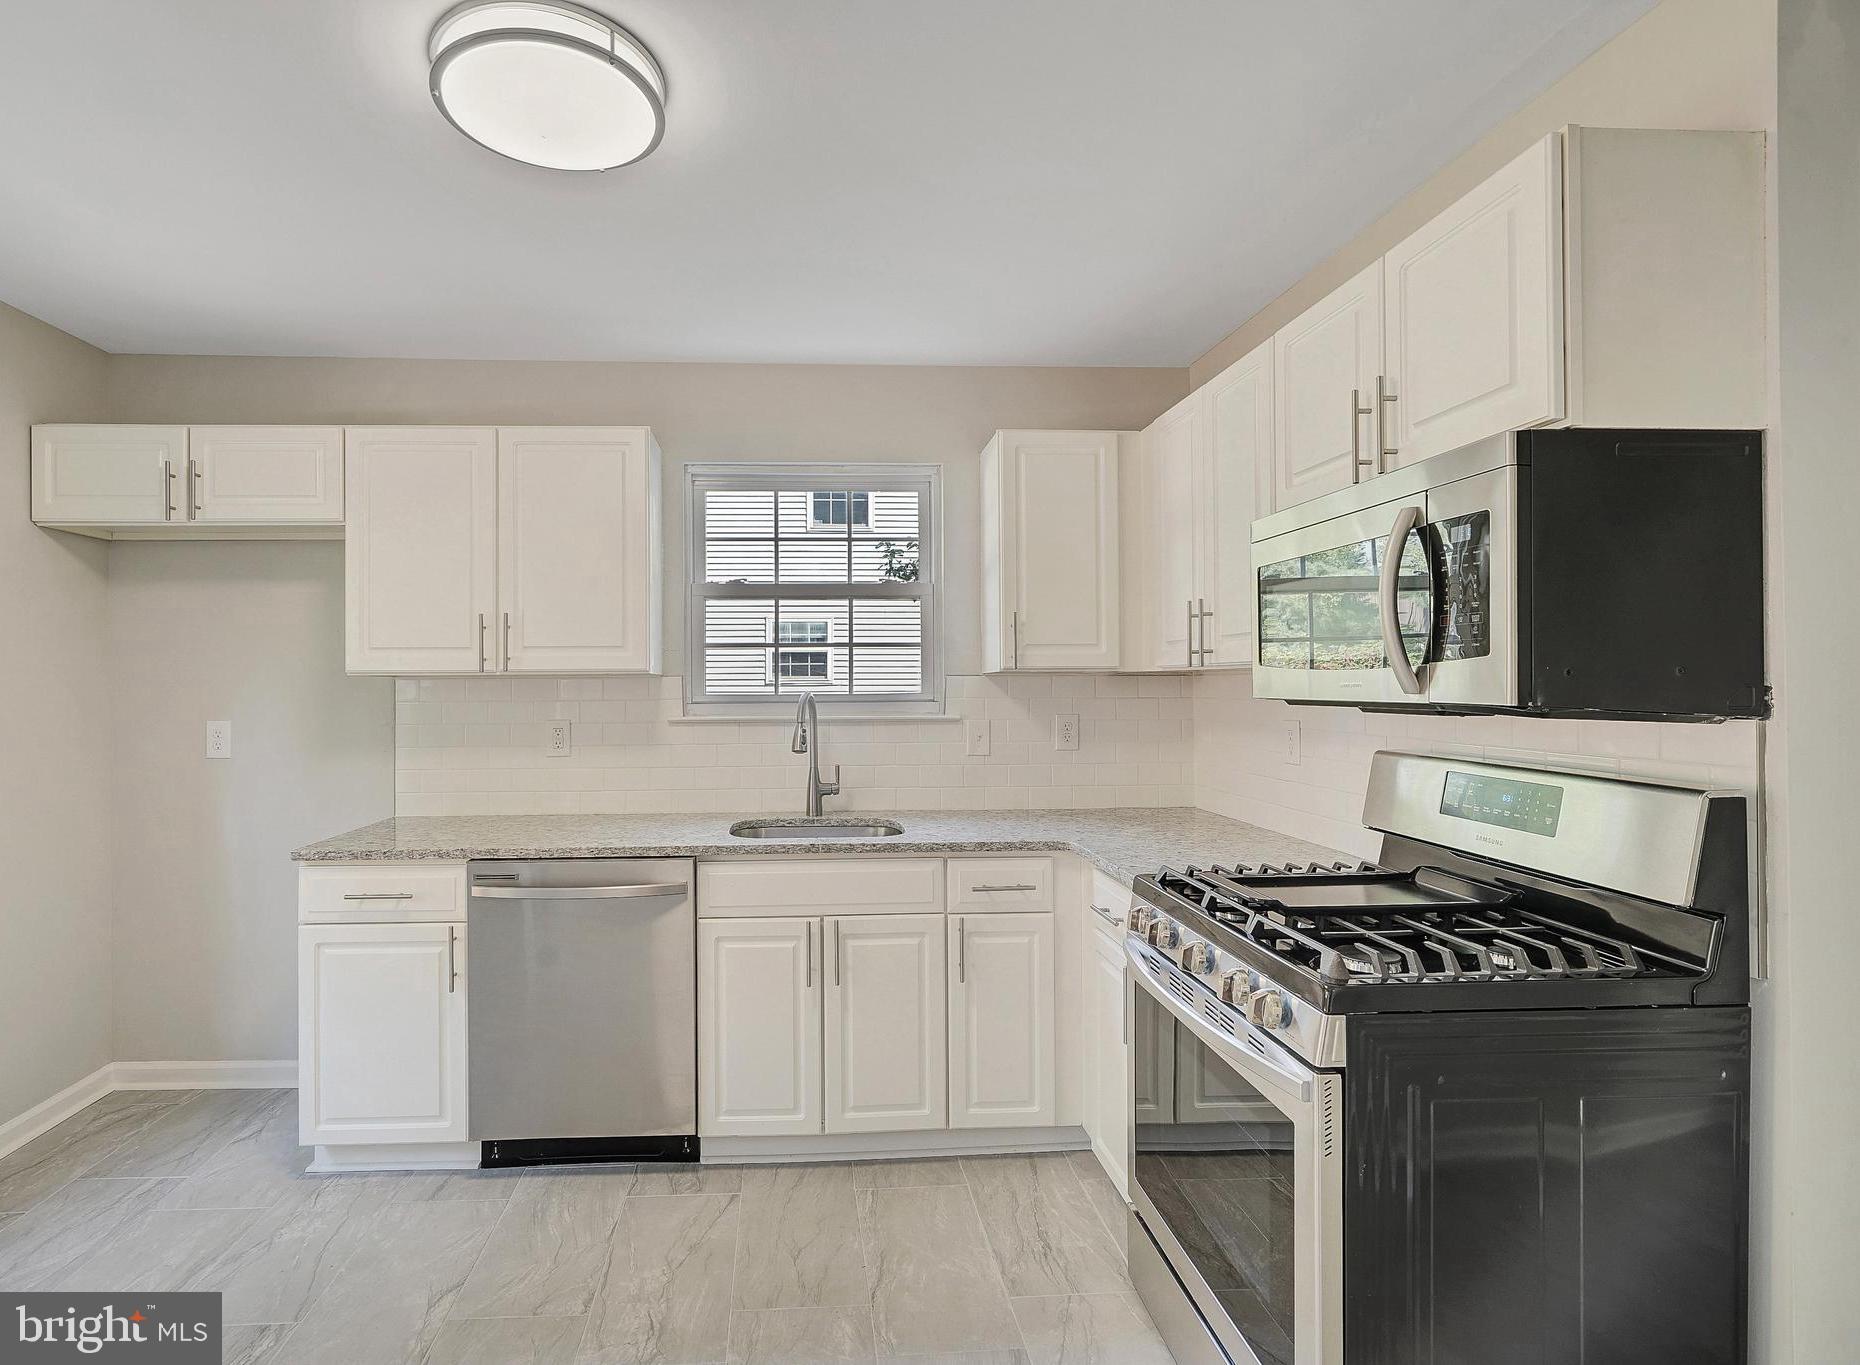 a kitchen with stainless steel appliances a sink dishwasher stove and white cabinets